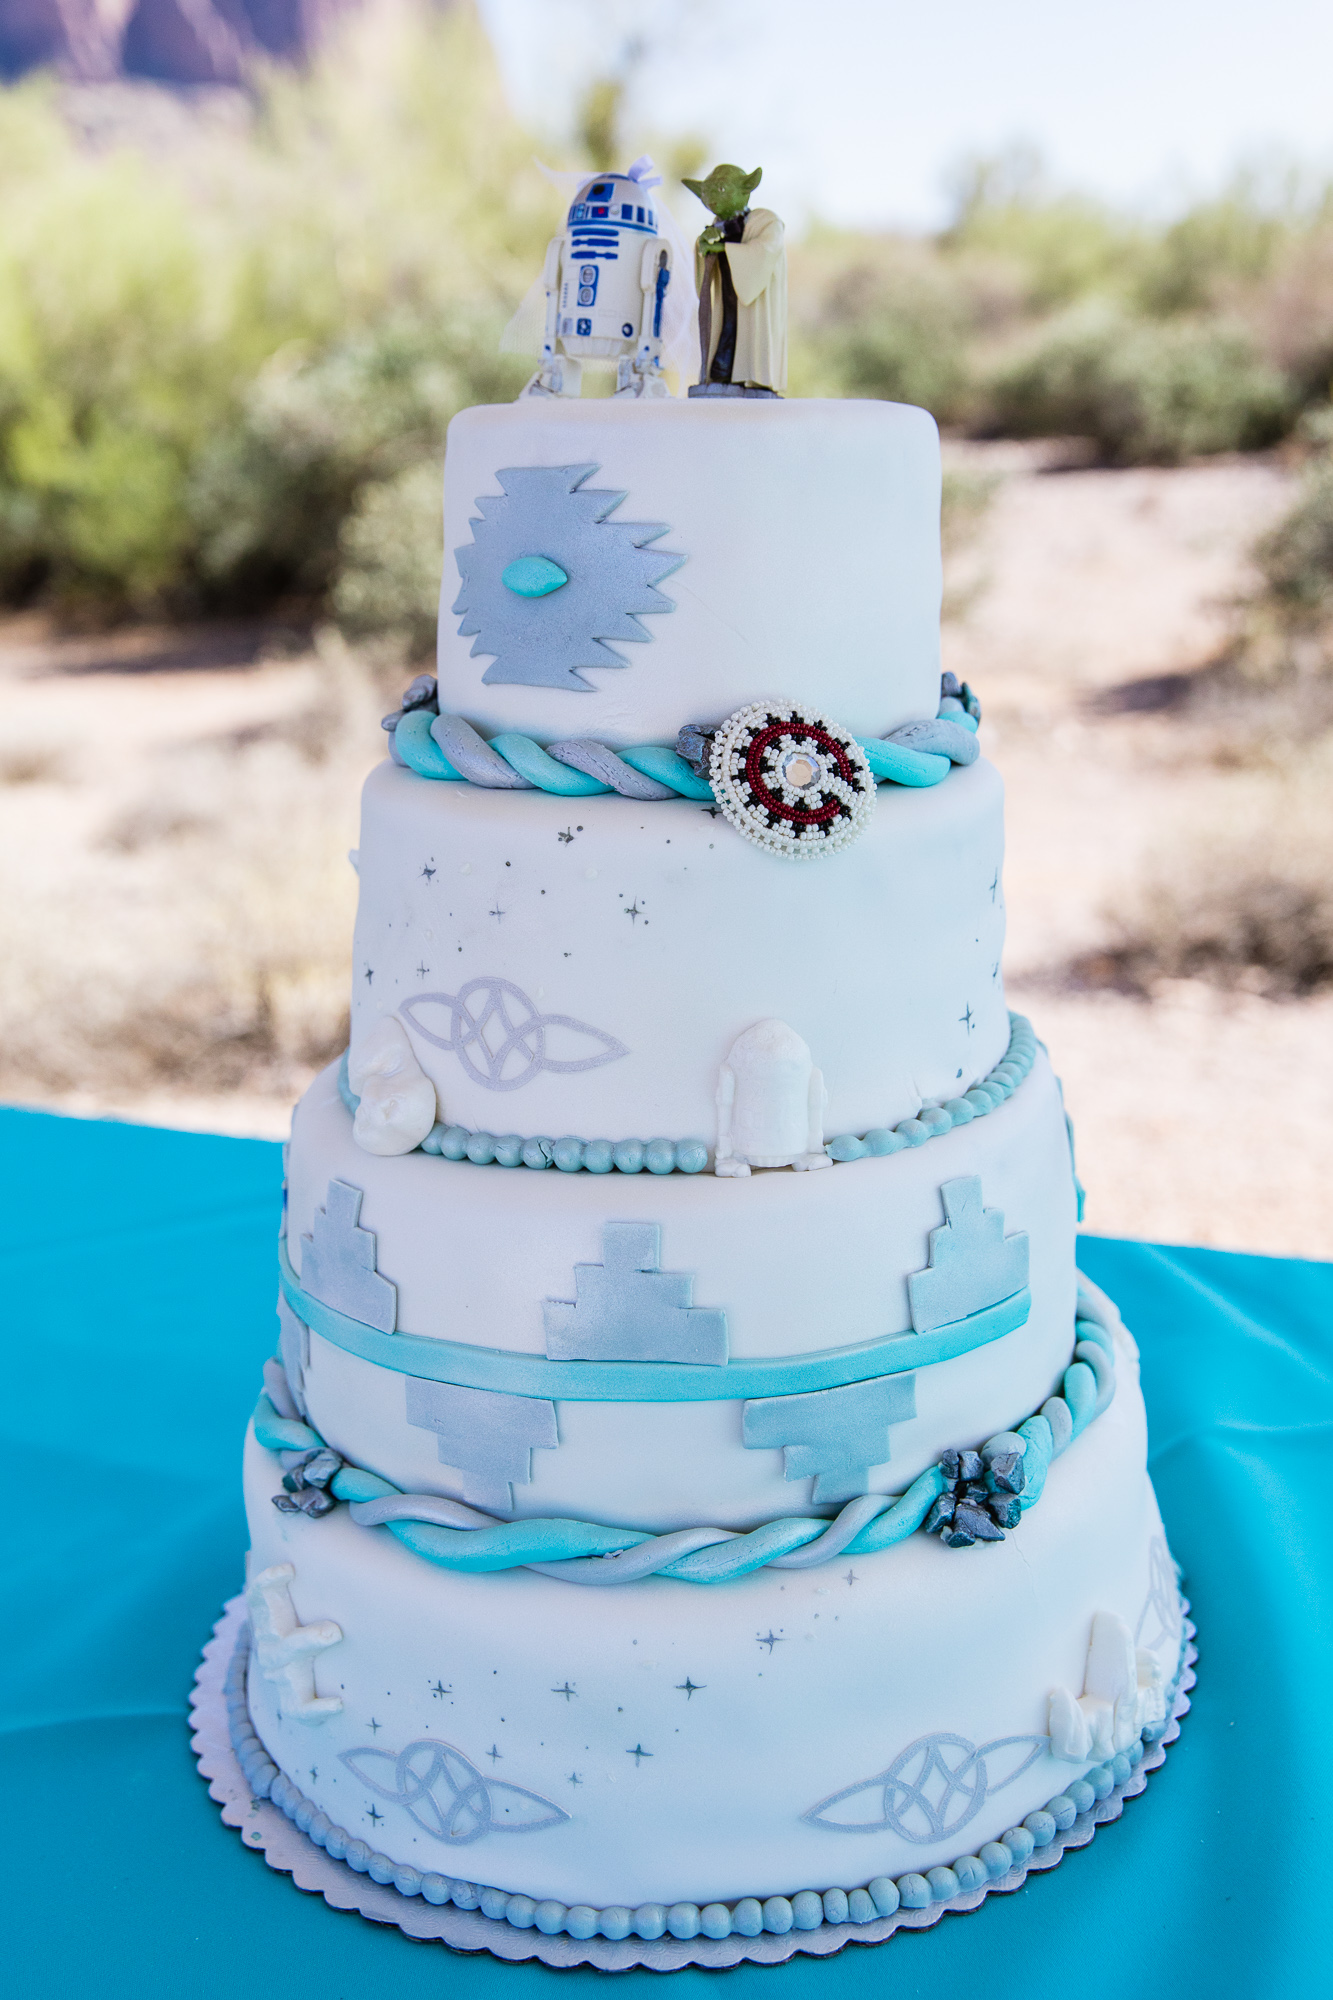 Navajo and Star Wars turquoise and grey wedding cake by wedding photographer PMA Photography.